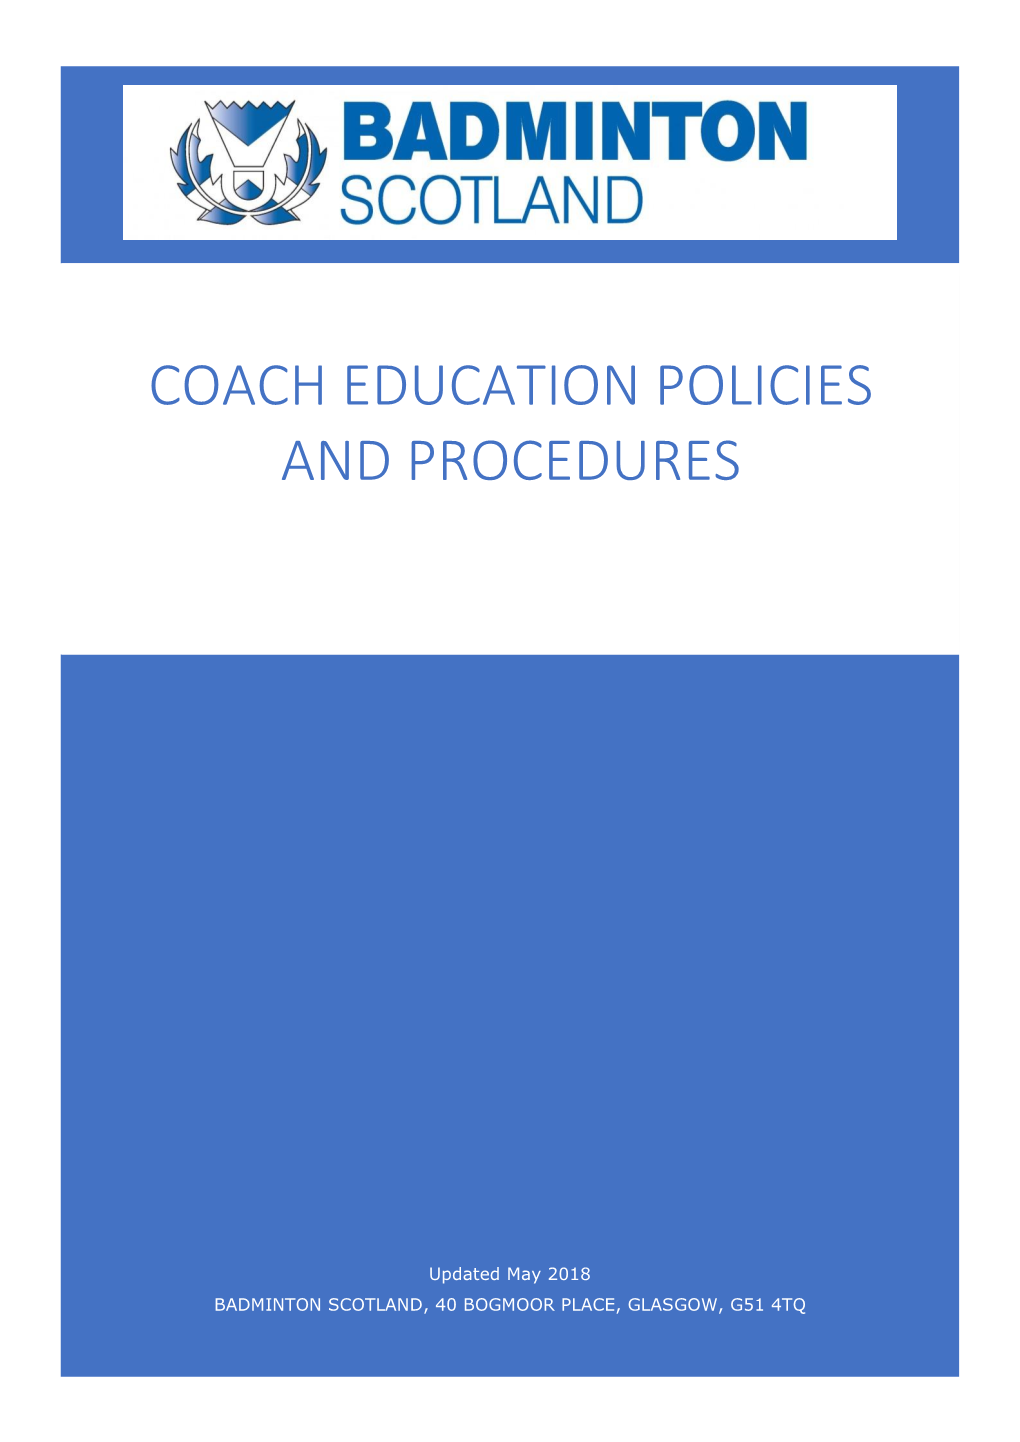 Coach Education Policies and Procedures